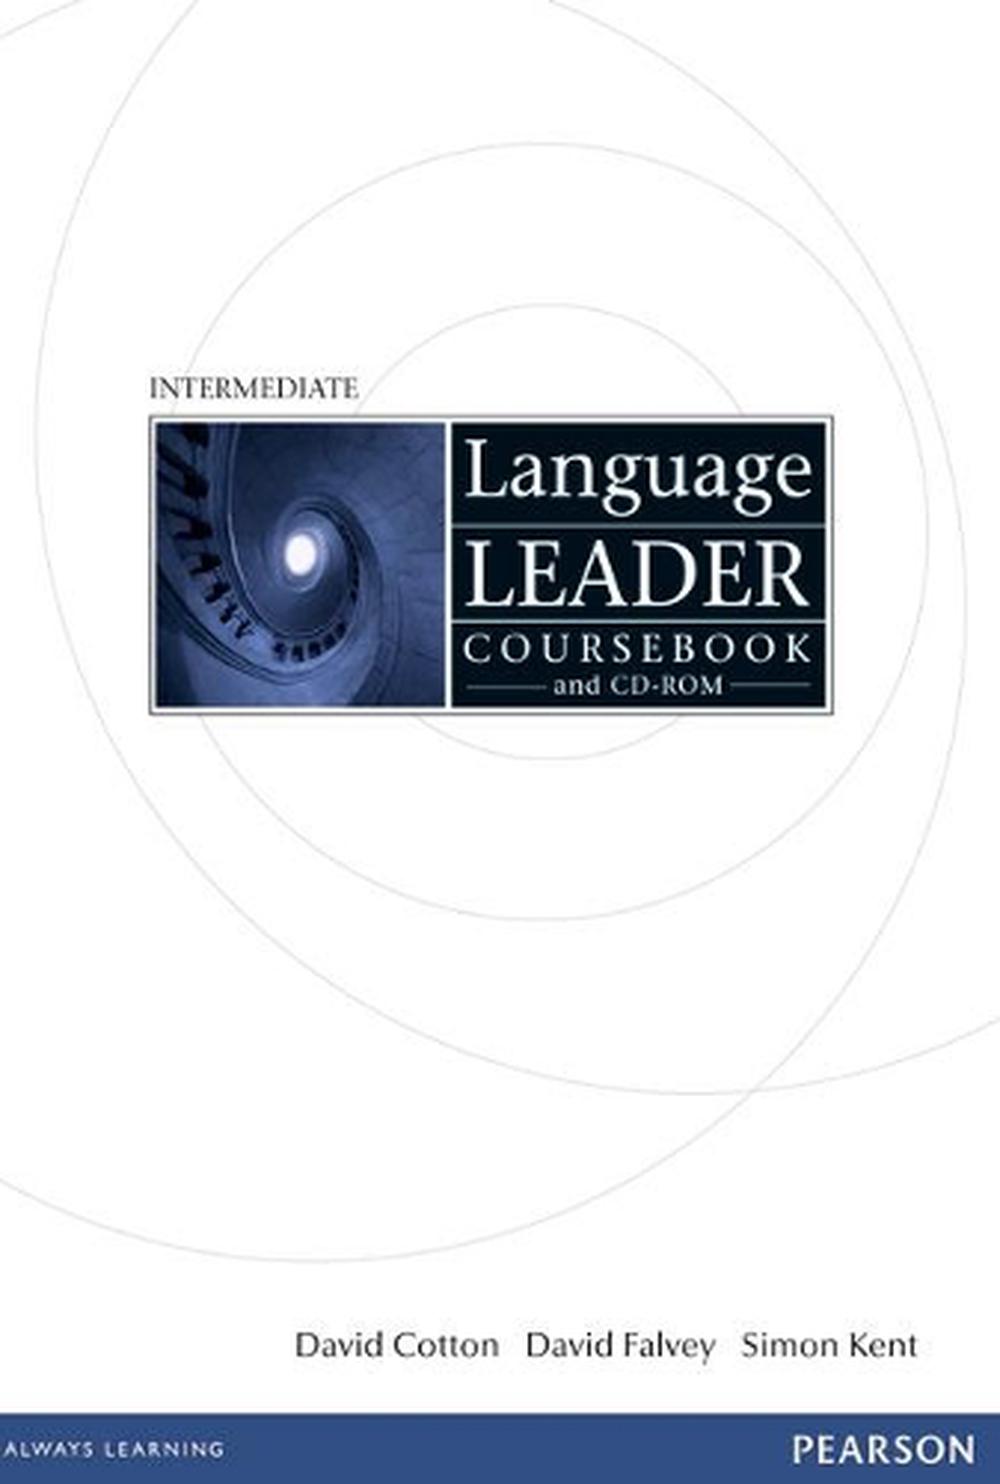 Language　by　CD-Rom　Cotton,　Book　The　Leader　and　Buy　Intermediate　9781405826884　Nile　Coursebook　David　Pack　Merchandise,　online　at